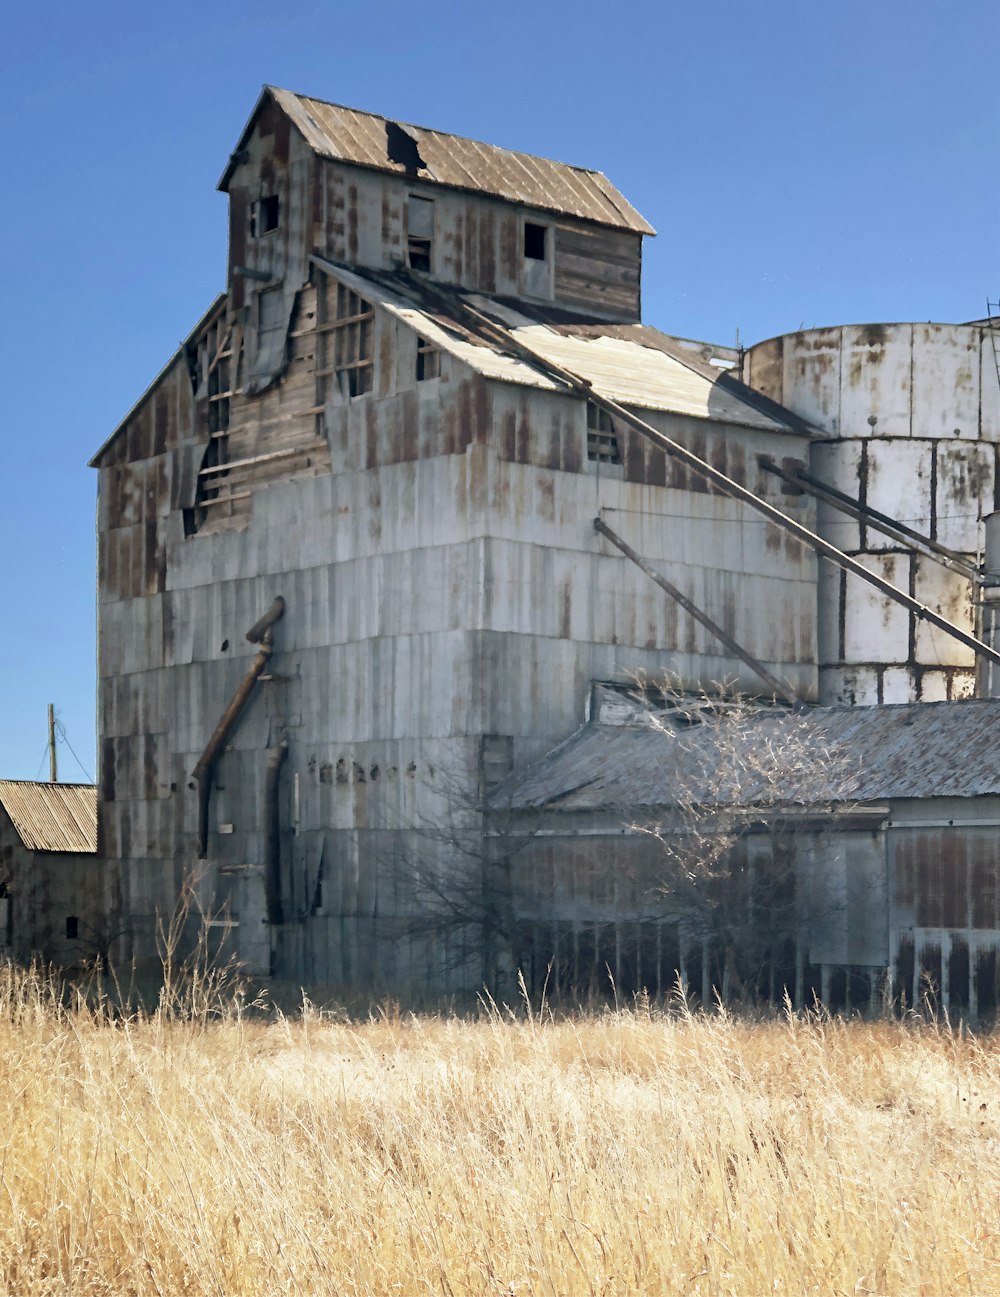 an old grain silo in a field of dry grass